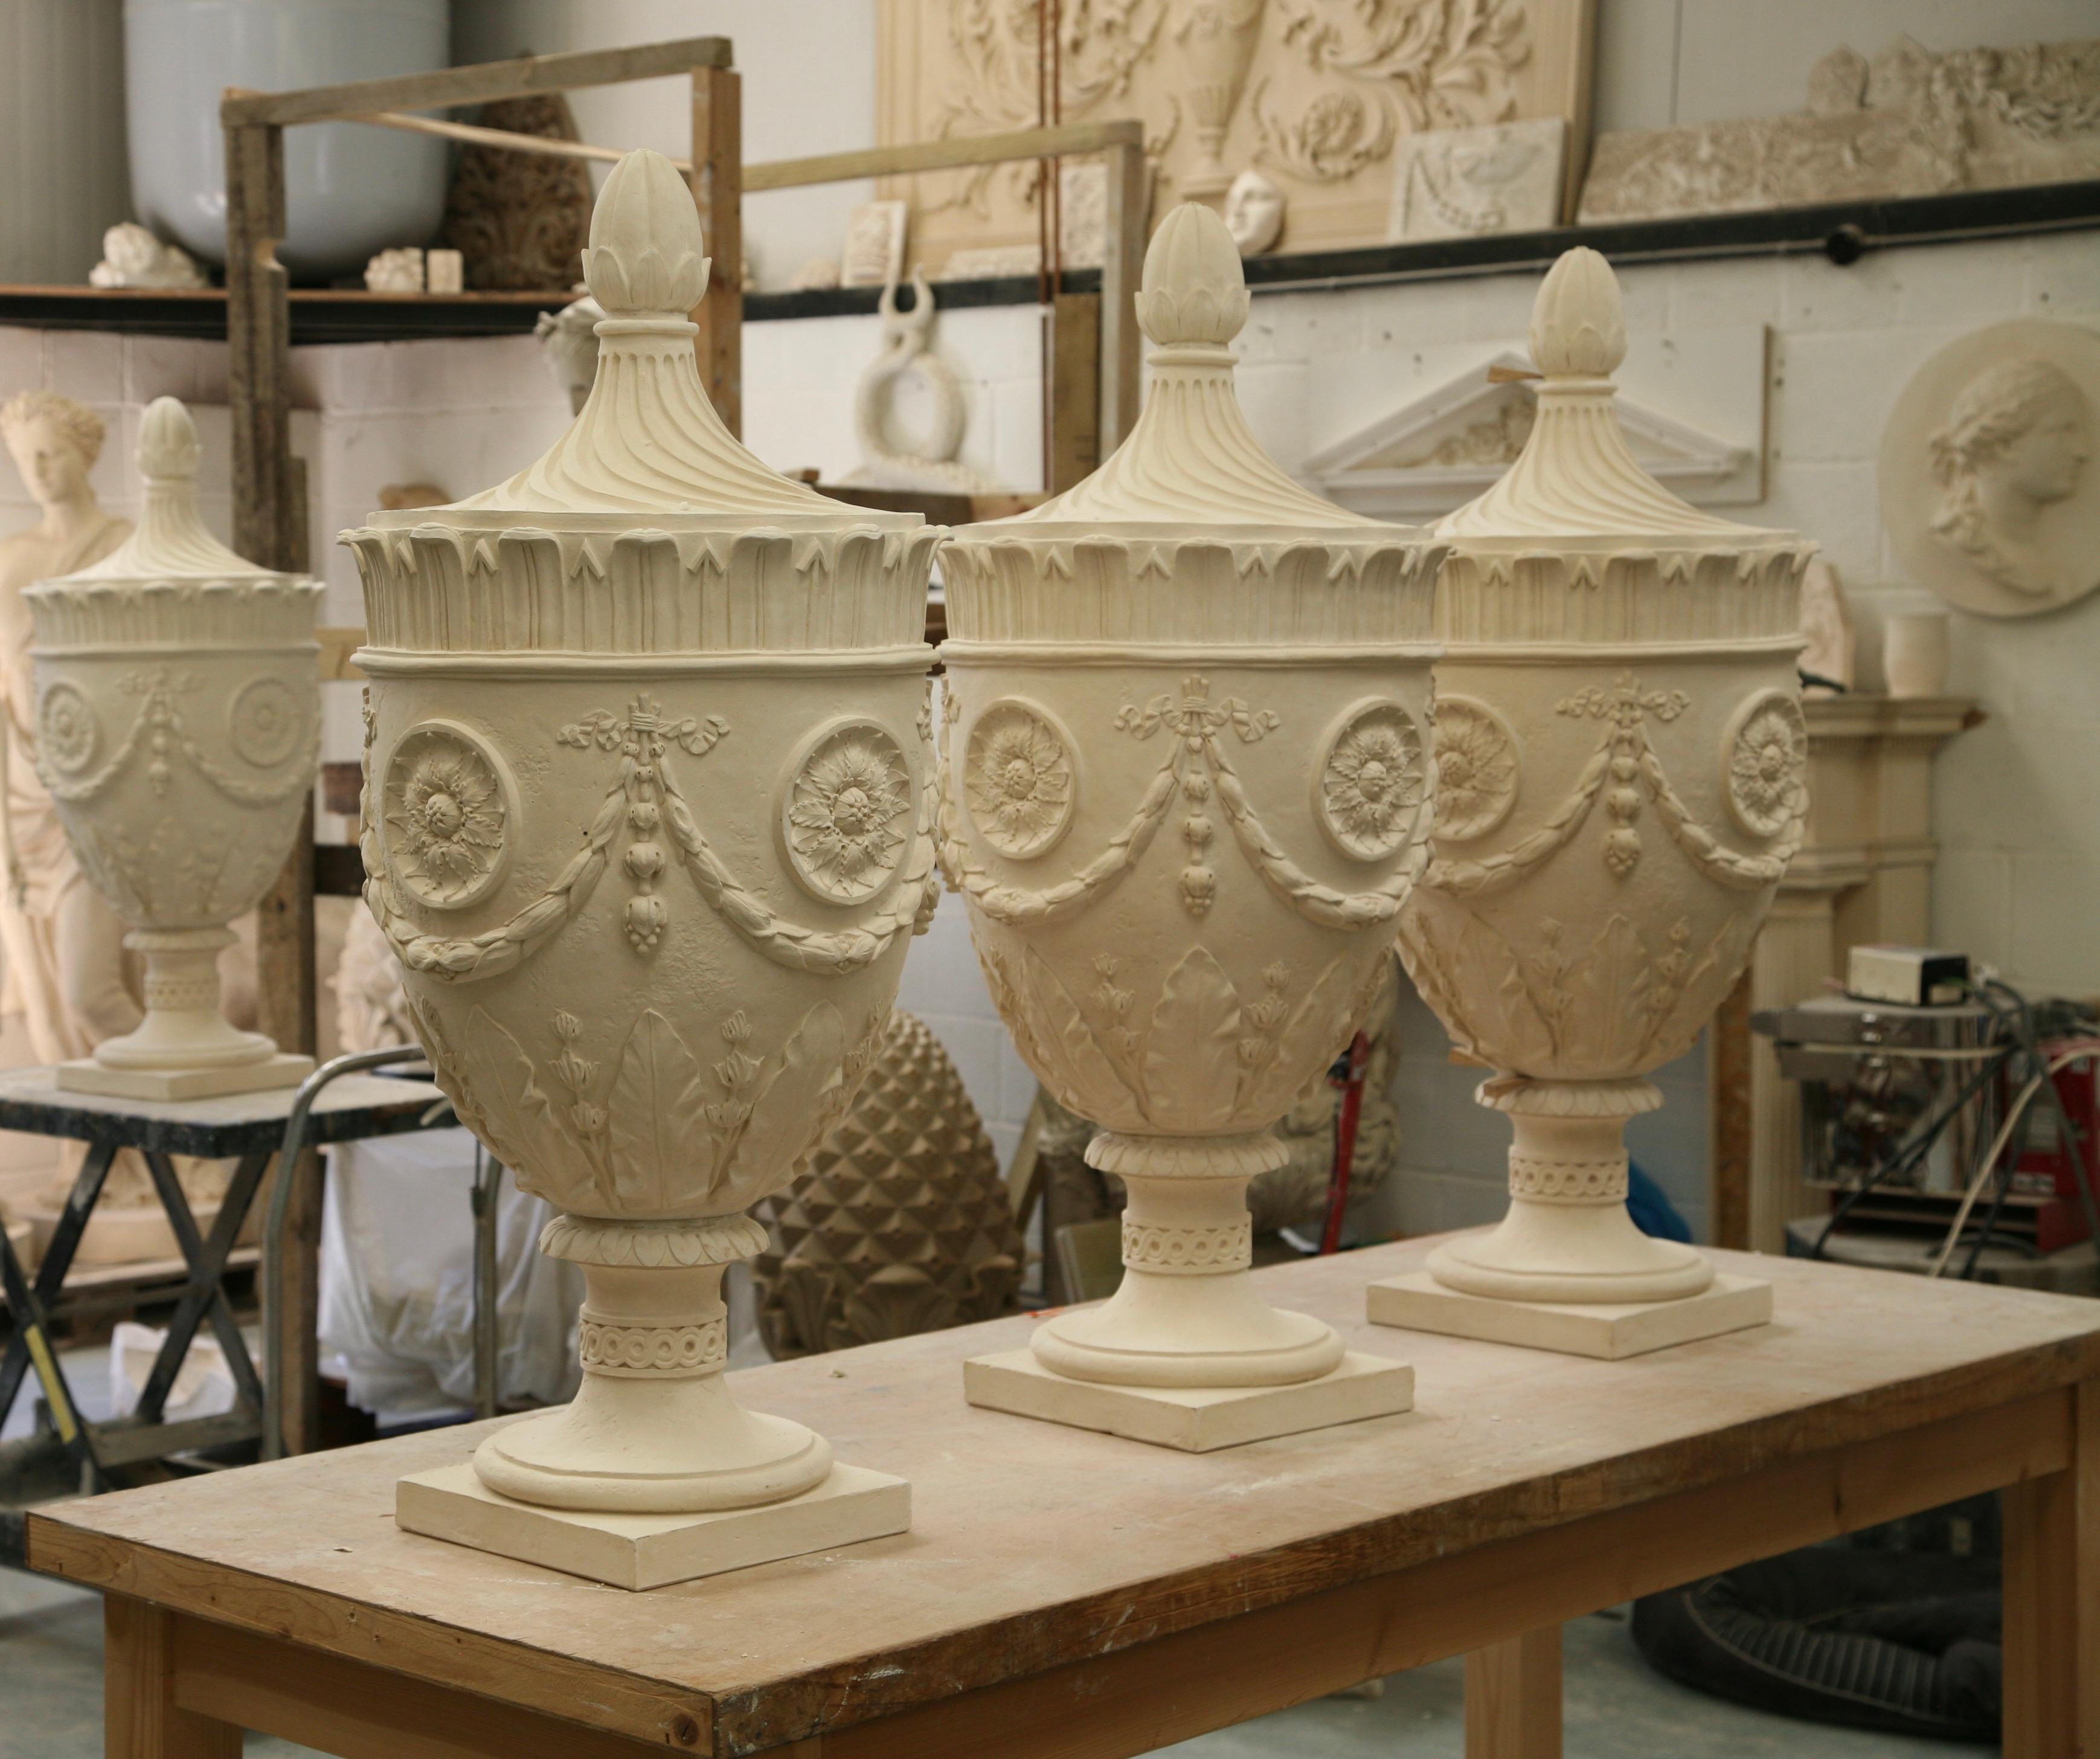 The Belmont urn is a reproduction of an 18th-century Coade urn, reportedly originating from 